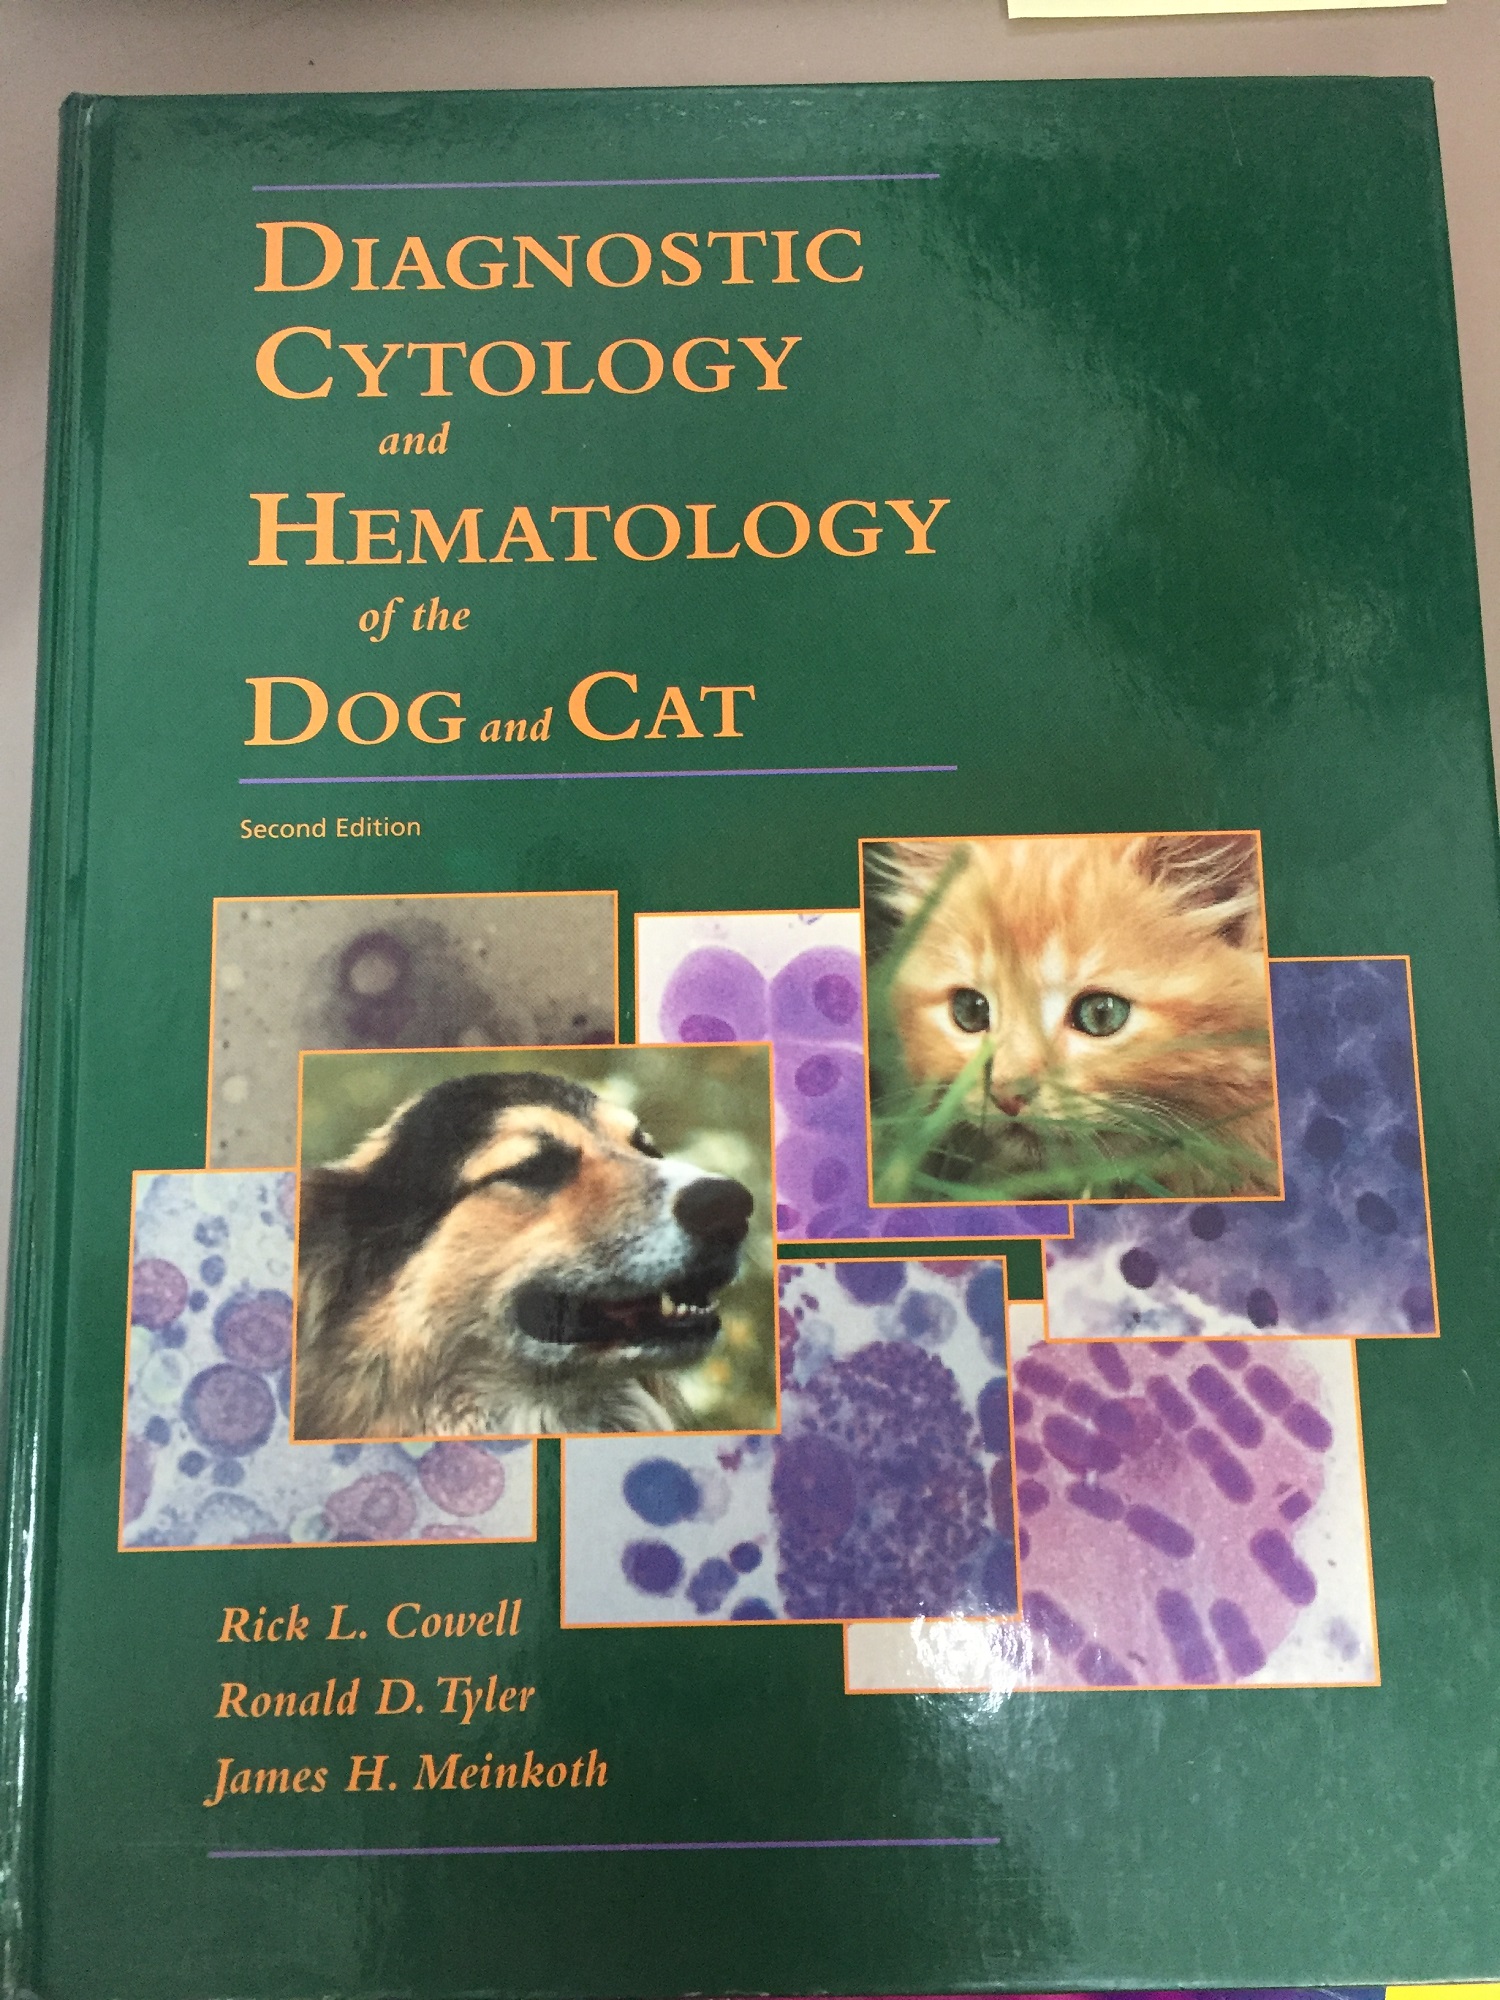 Diagnostic Cytology and Hematology of the Dog and Cat VEEN Canada